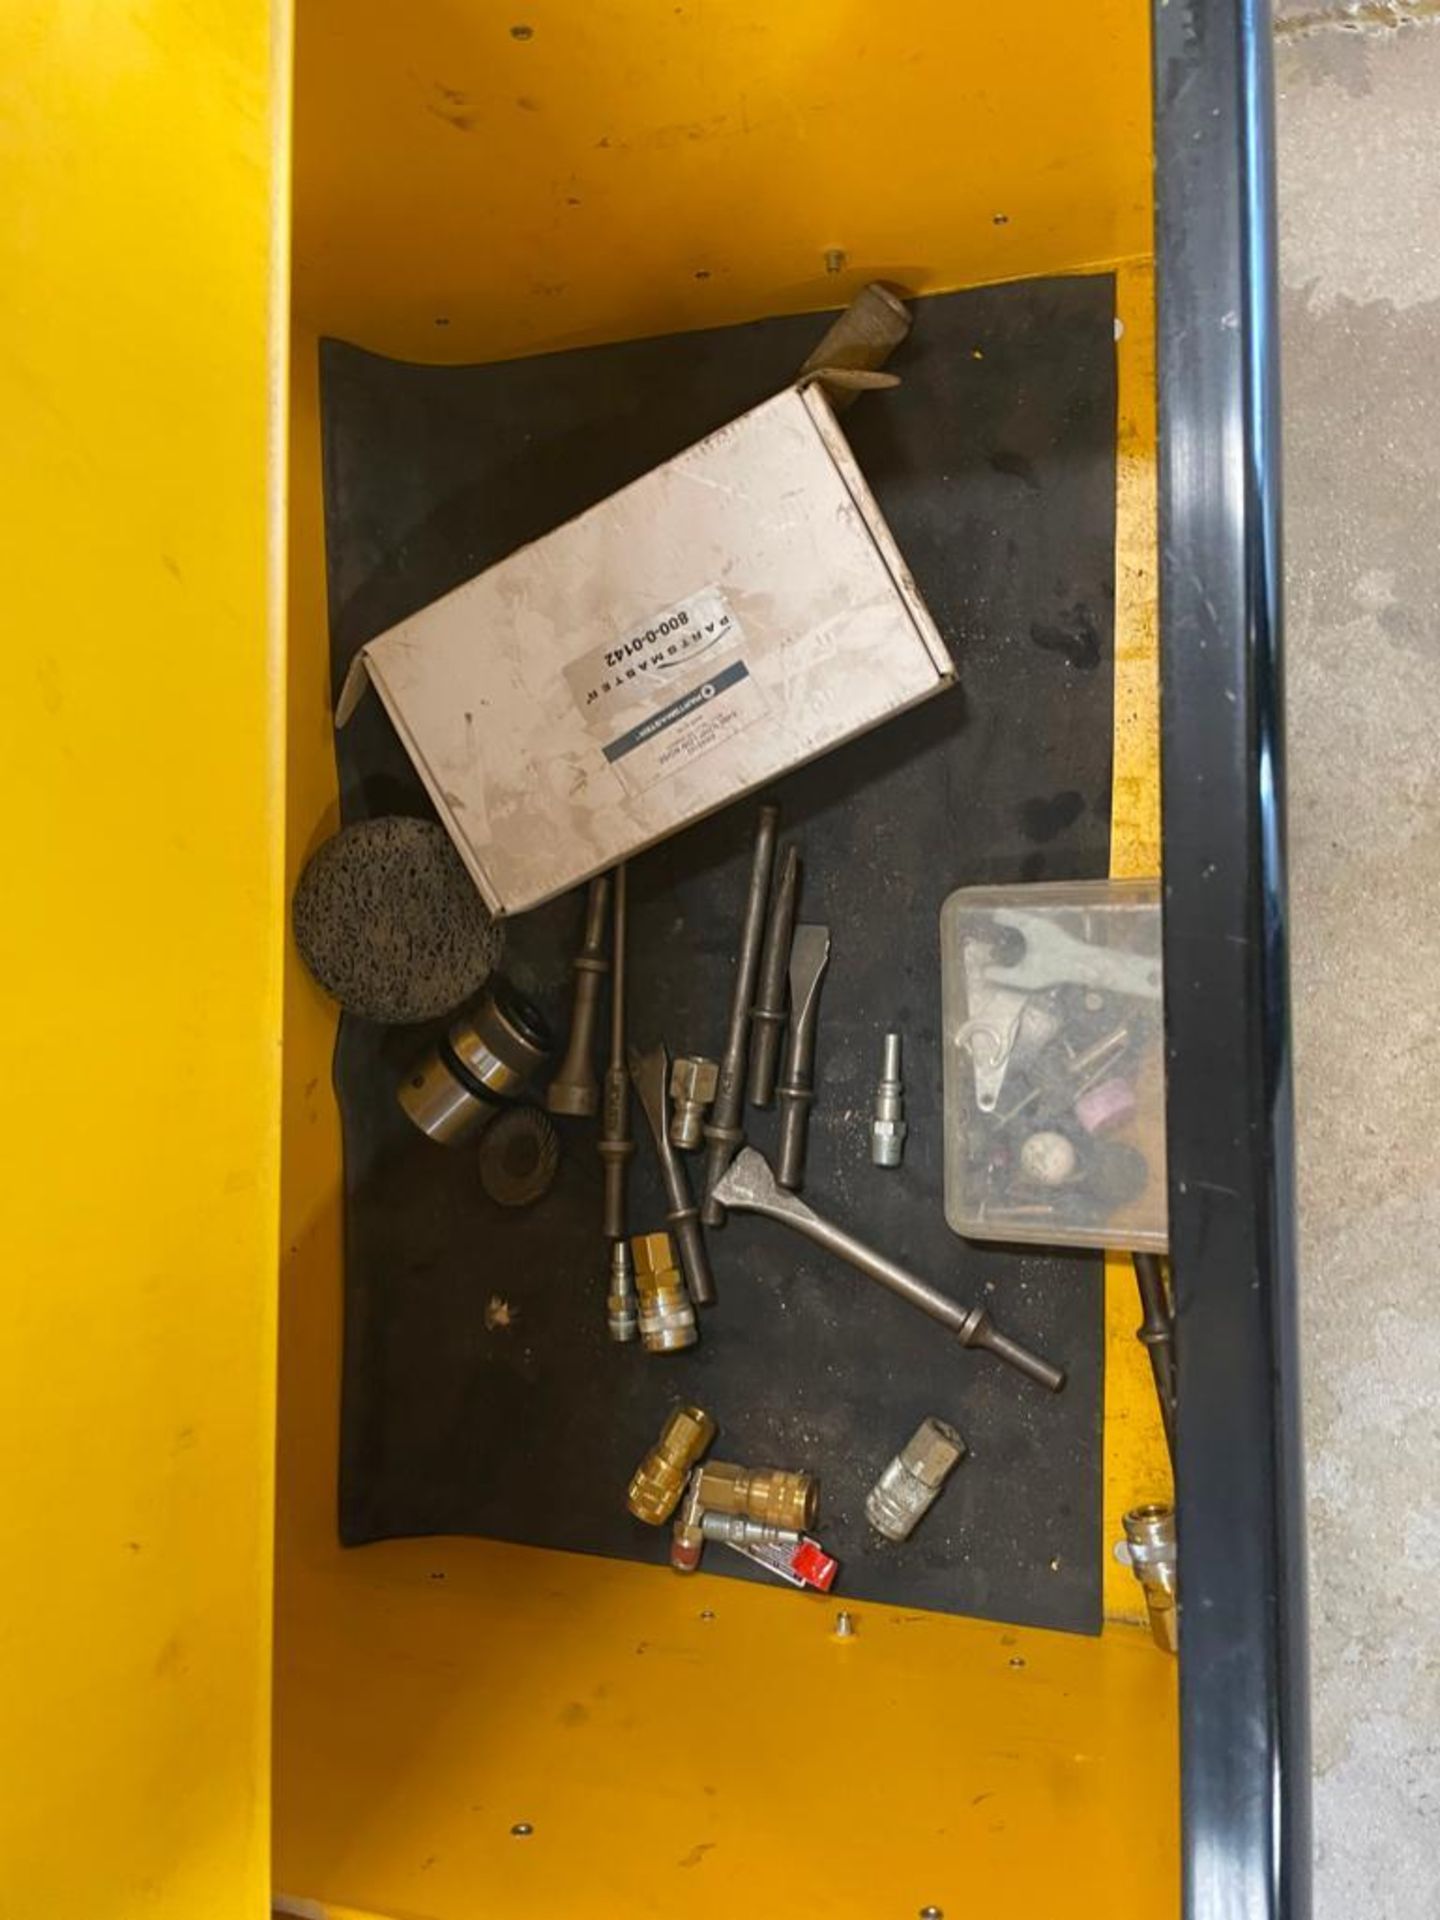 DeWalt Mechanics Tool Box with Contents, Wrenches, Sockets, Plyers, Pipe Wrench, Screwdrivers, etc. - Image 23 of 24